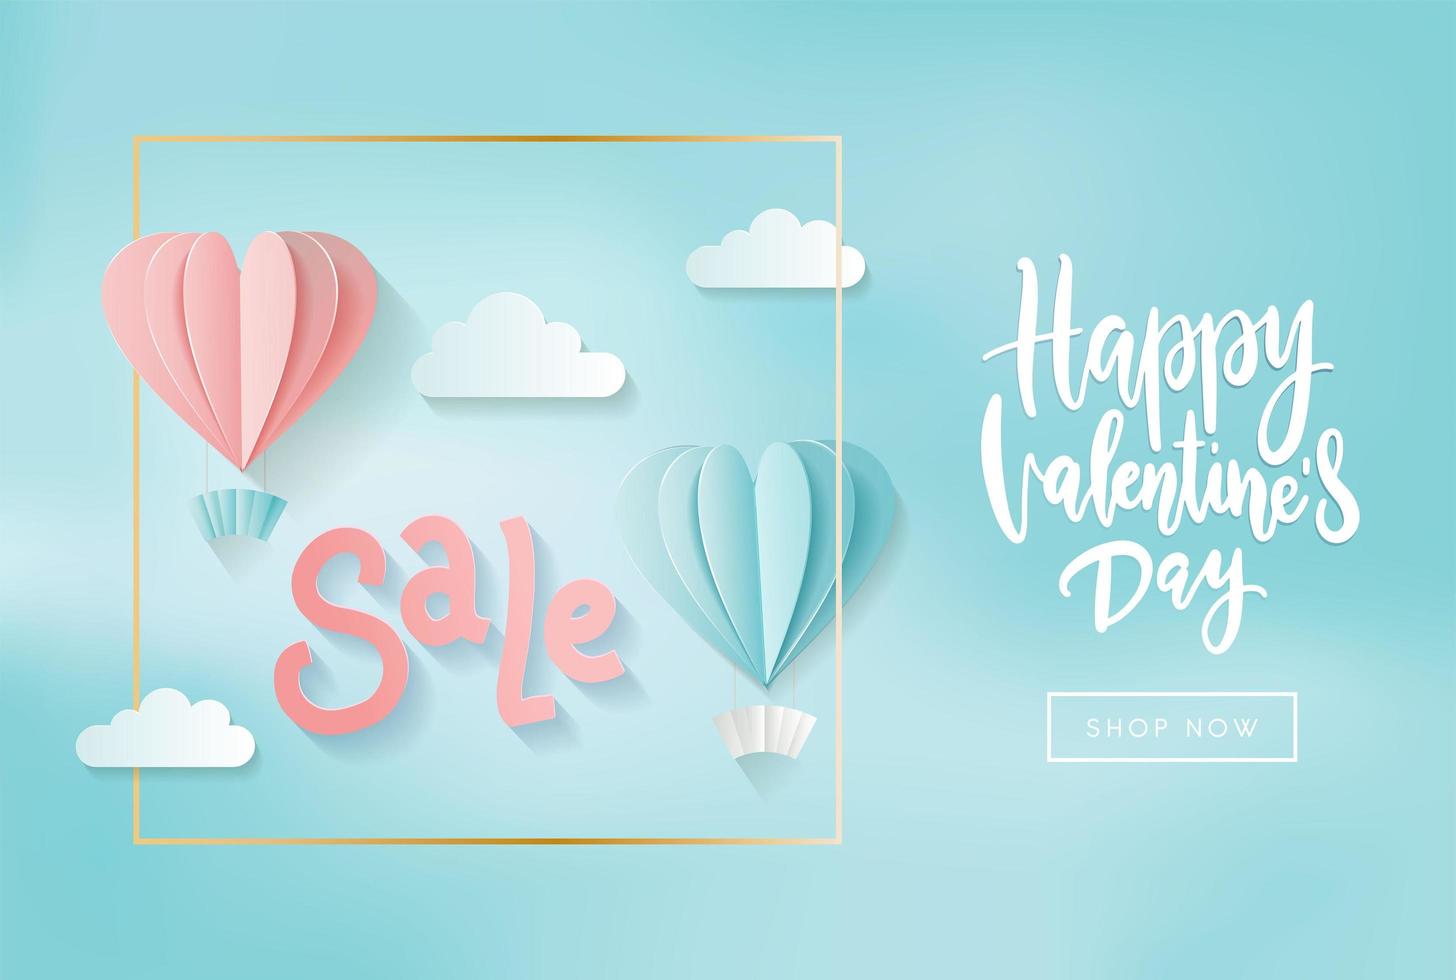 Valentine s day sale web banner of gentle pink and blue heart hot air balloons on blue sky shine background. Sale text for holiday shop discount promo design template with hand lettering vector